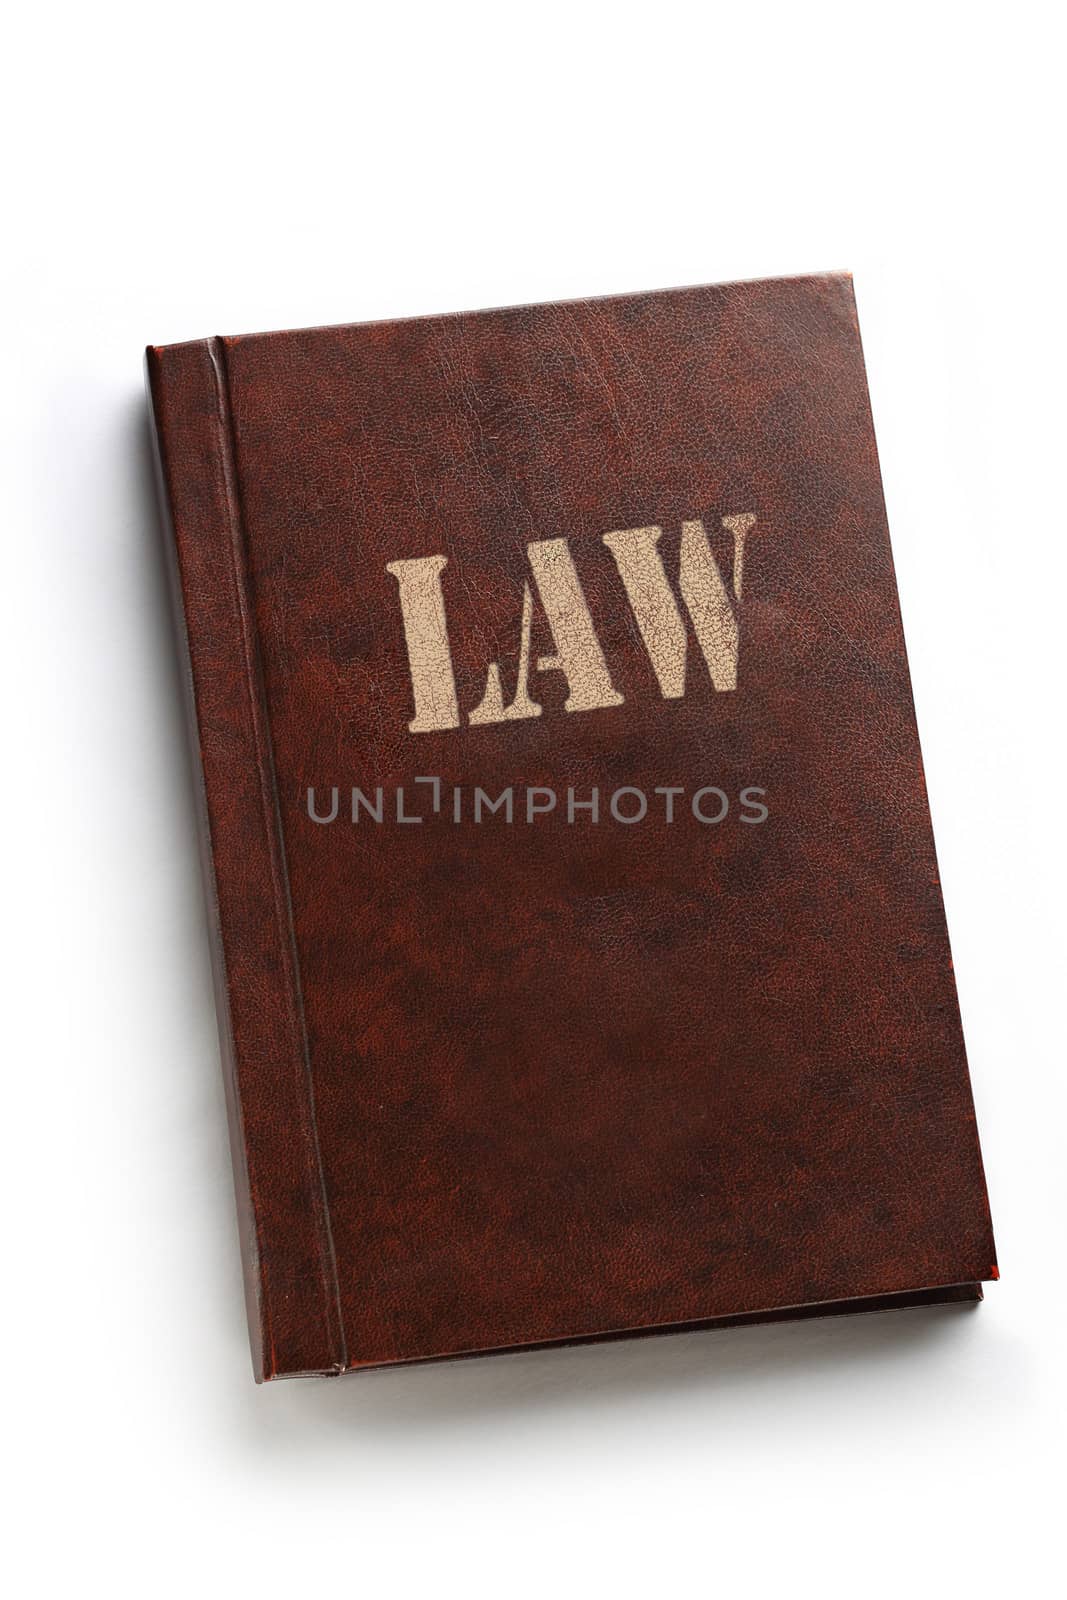 Law book on white background